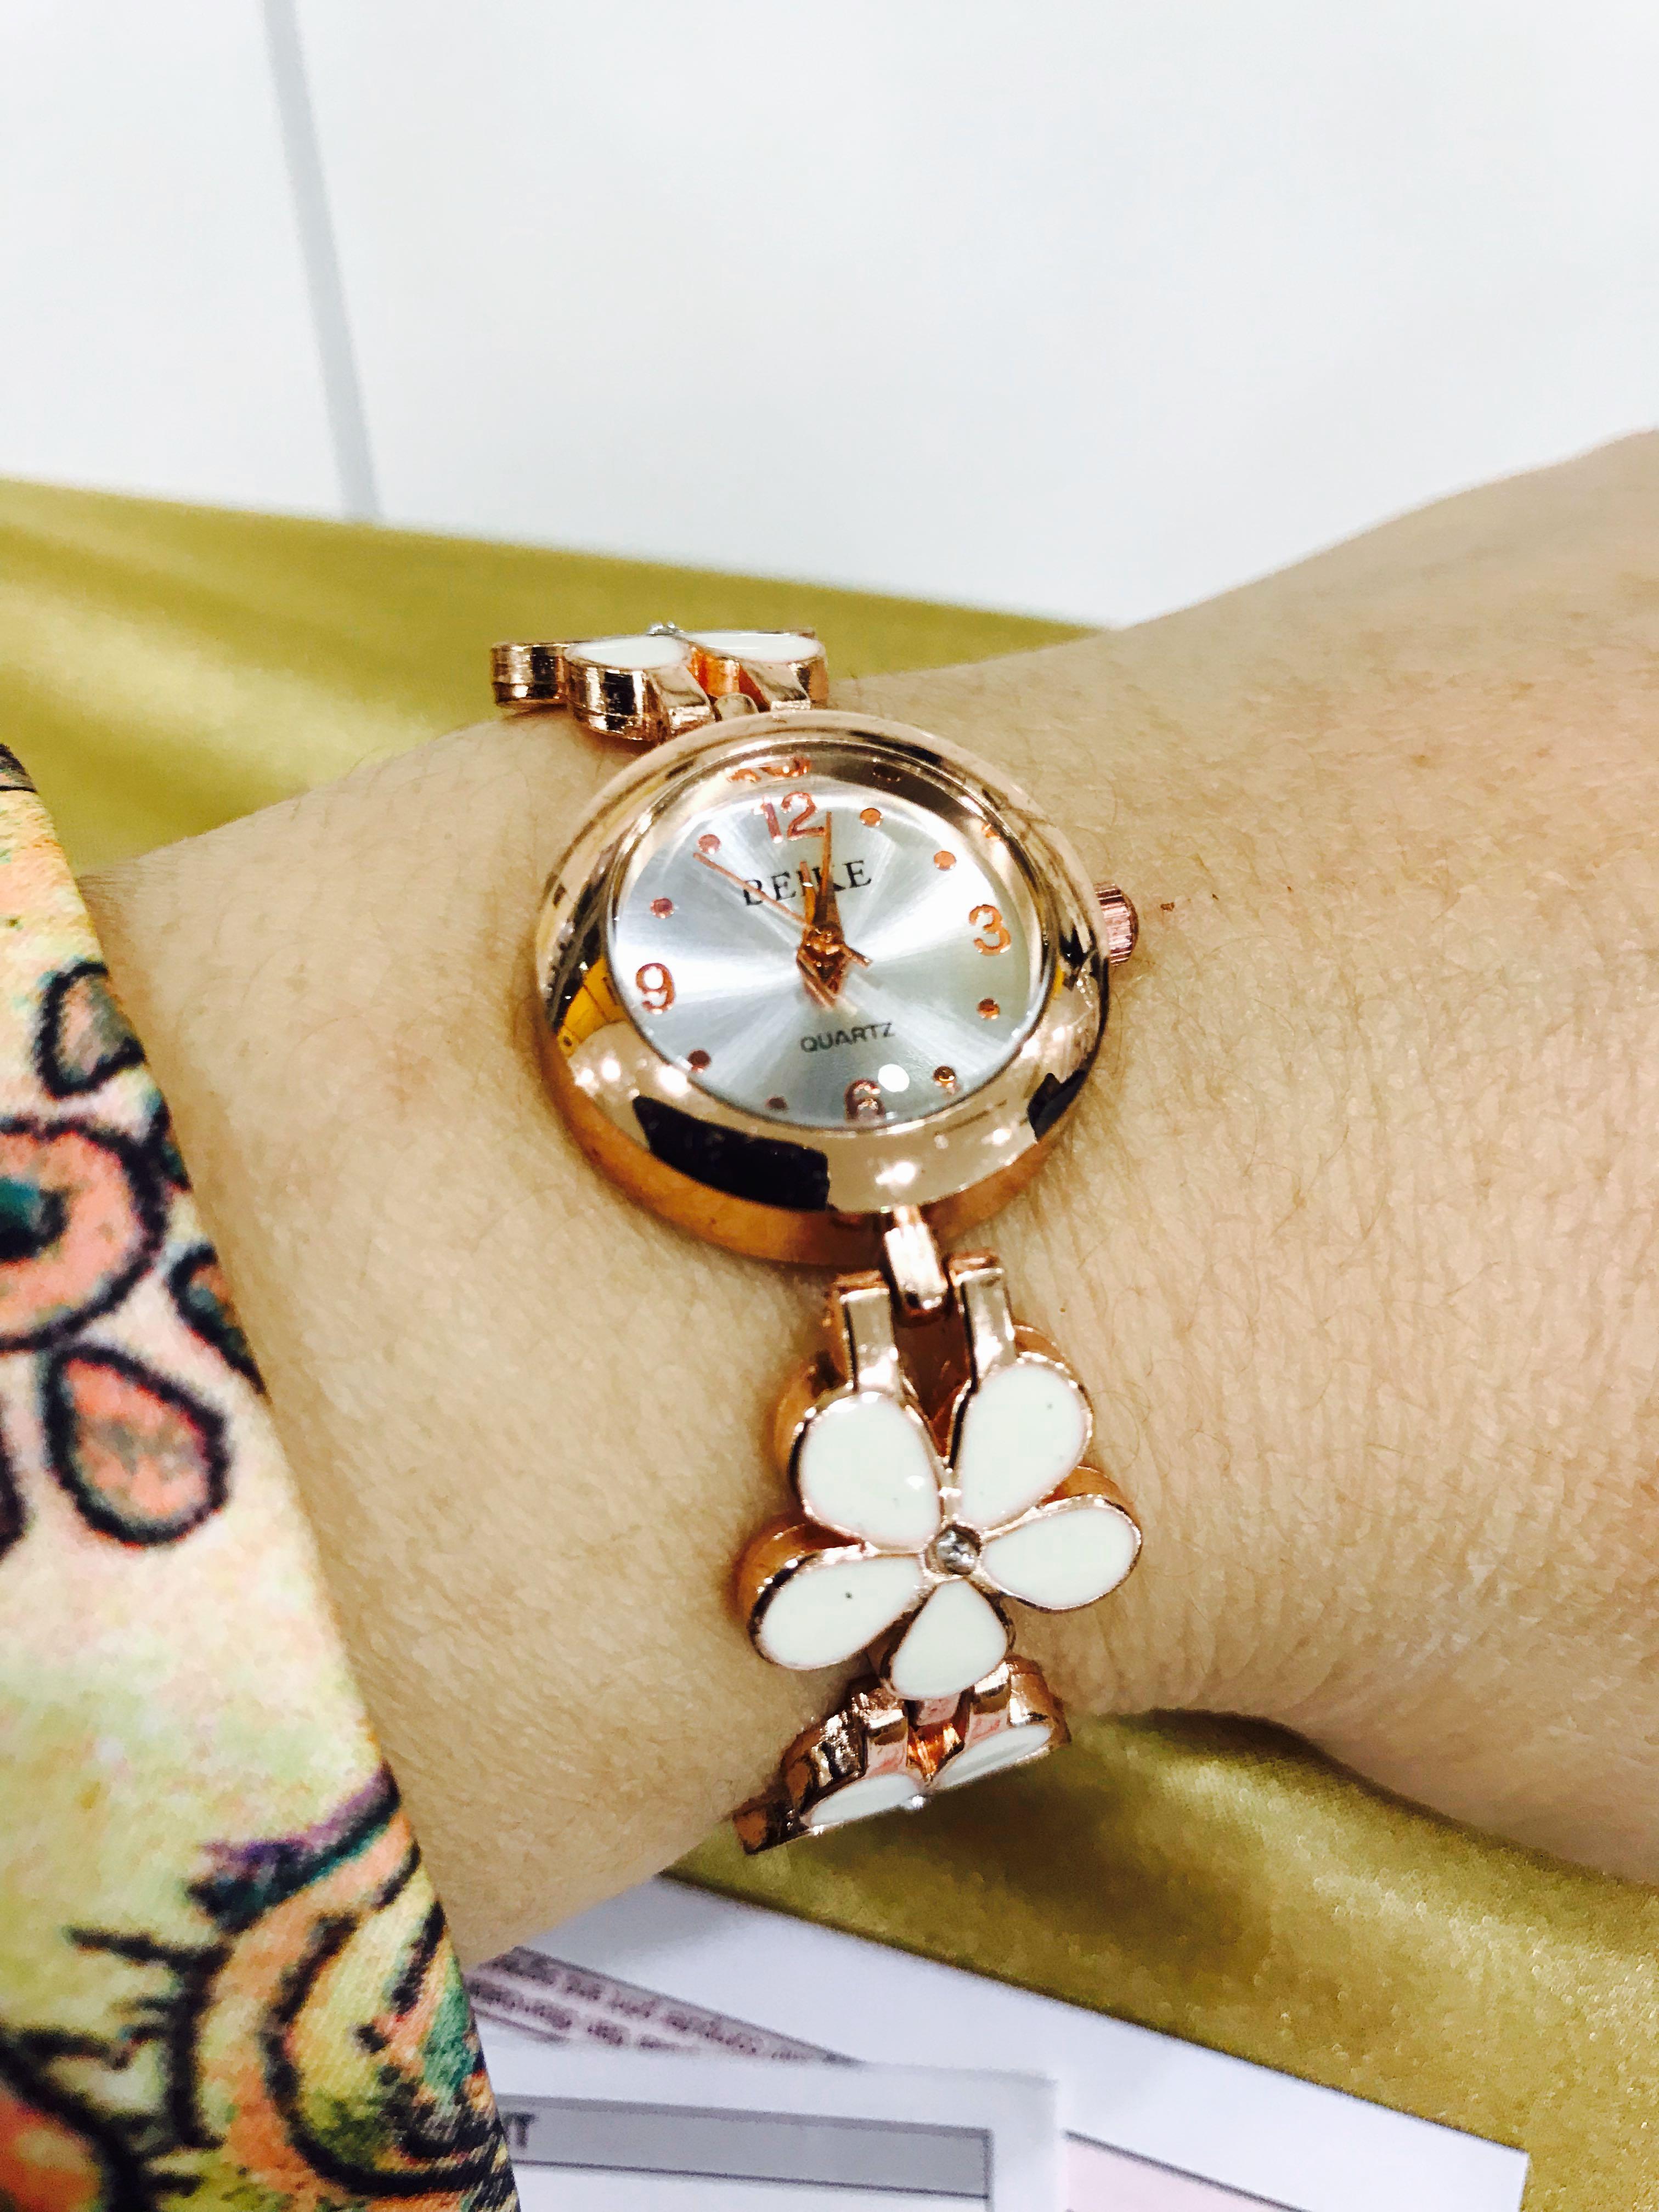 Women's Watches - ELEGANT LADIES WATCH FROM THE BEIKE QUARTZ COLLECTION!  was sold for R21.00 on 15 Oct at 21:01 by cindysn in Vereeniging  (ID:45657418)